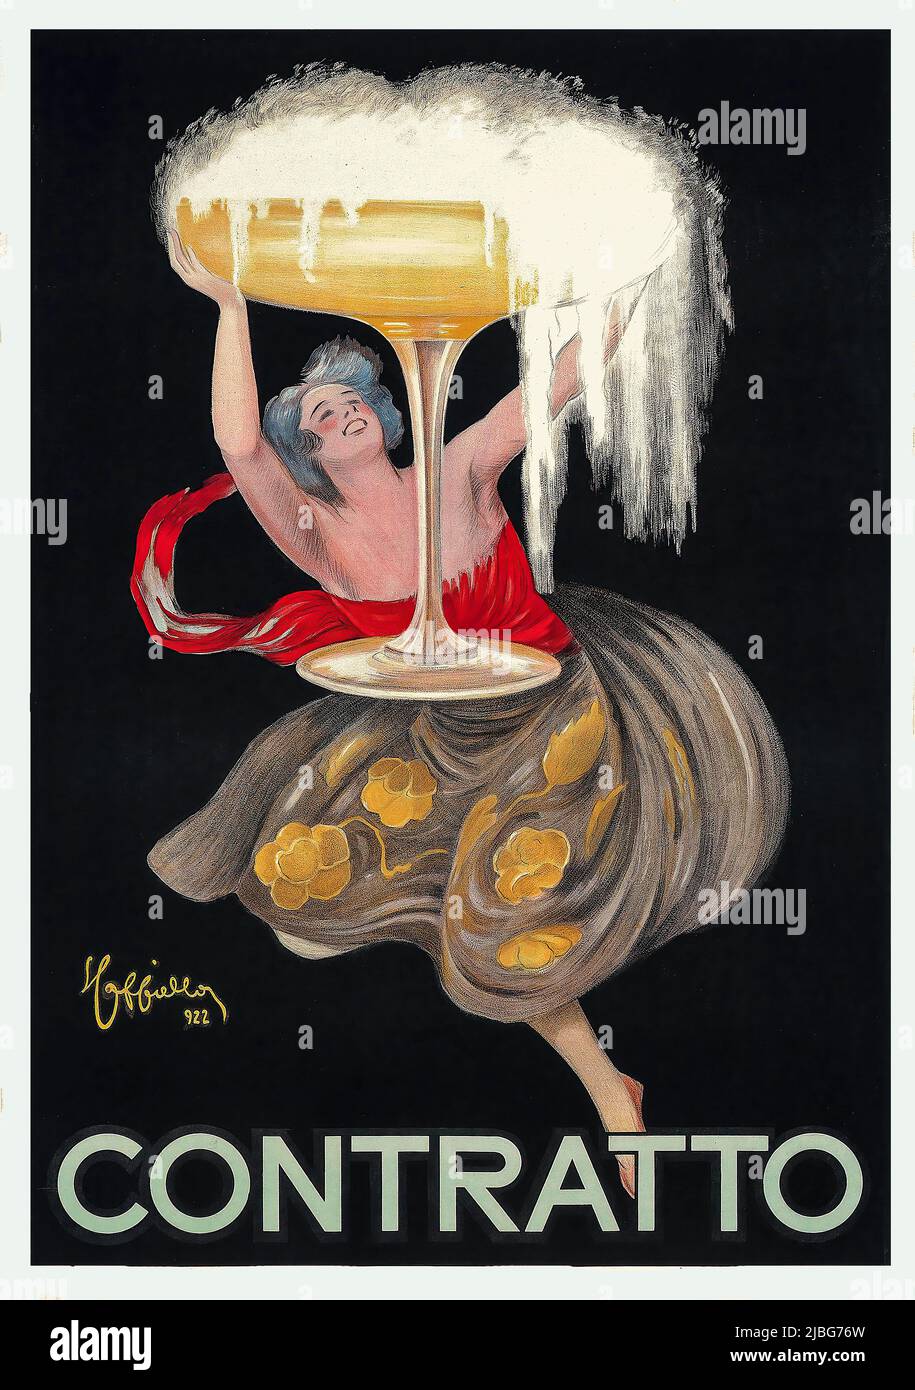 A turn of the 20th century advertising poster by Leonetto Cappiello (1875-1942), showing a woman holding aloft a bubbling glass of Champenoise, the very first Italian vintage from a winery in Canelli. At one time, the wine was supplied to the Vatican, the House of Savoy (the Italian Royal Family), as well as to the British monarchy. Stock Photo